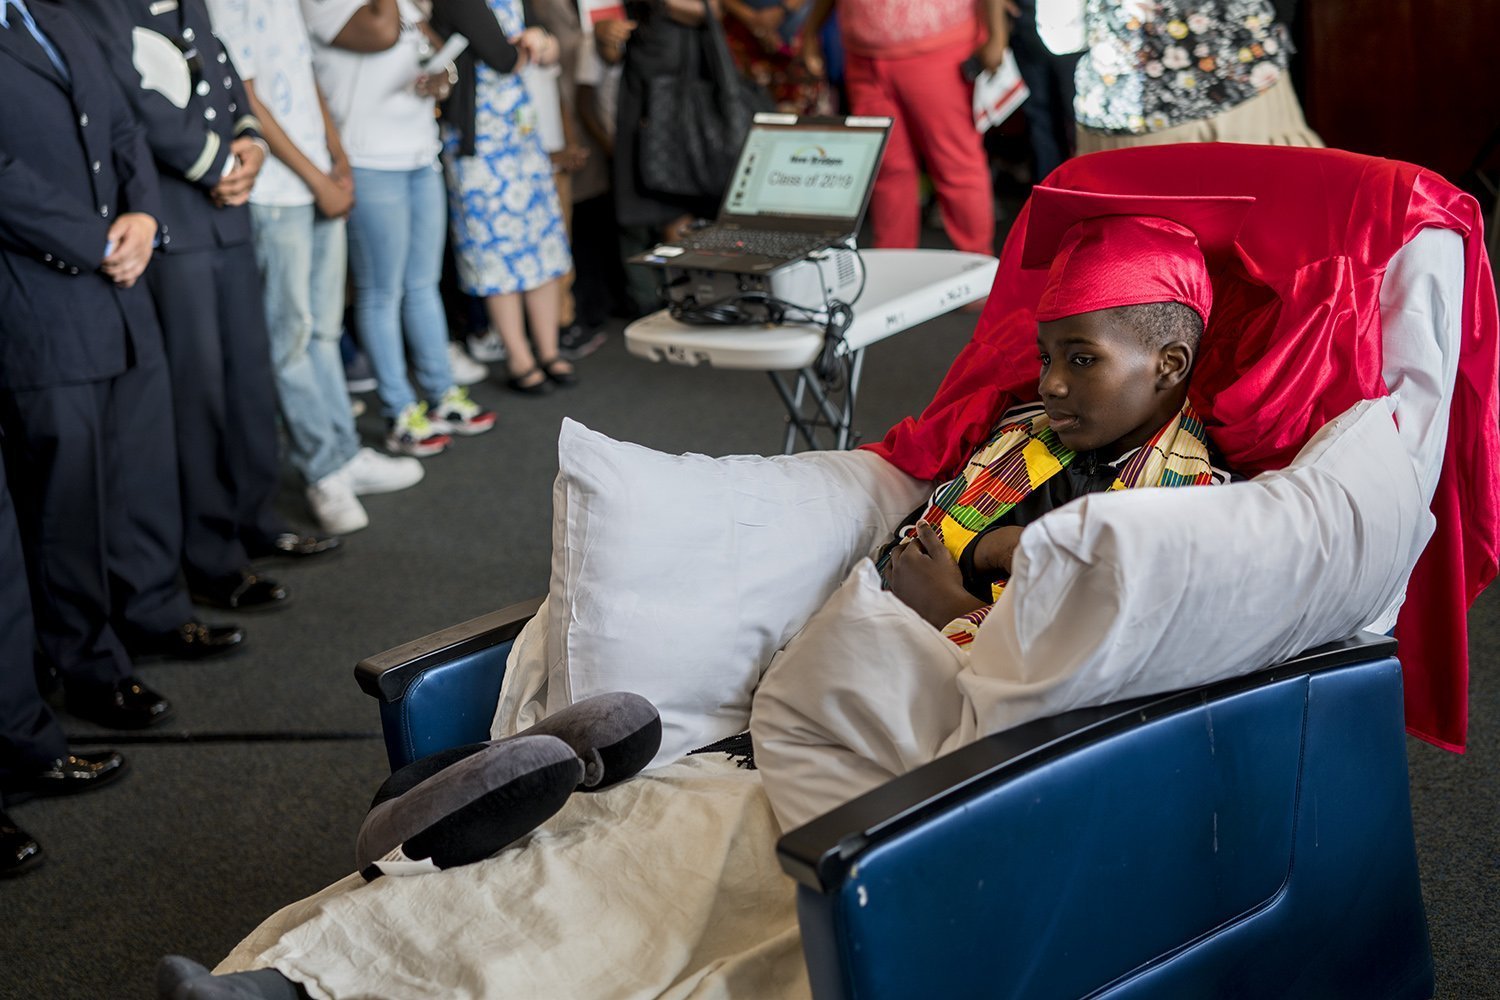 Nearly a hundred of police officers, community organizers, reporters, and friends and family gathered to celebrate Jayden's graduation (Photo by Tsubasa Berg).